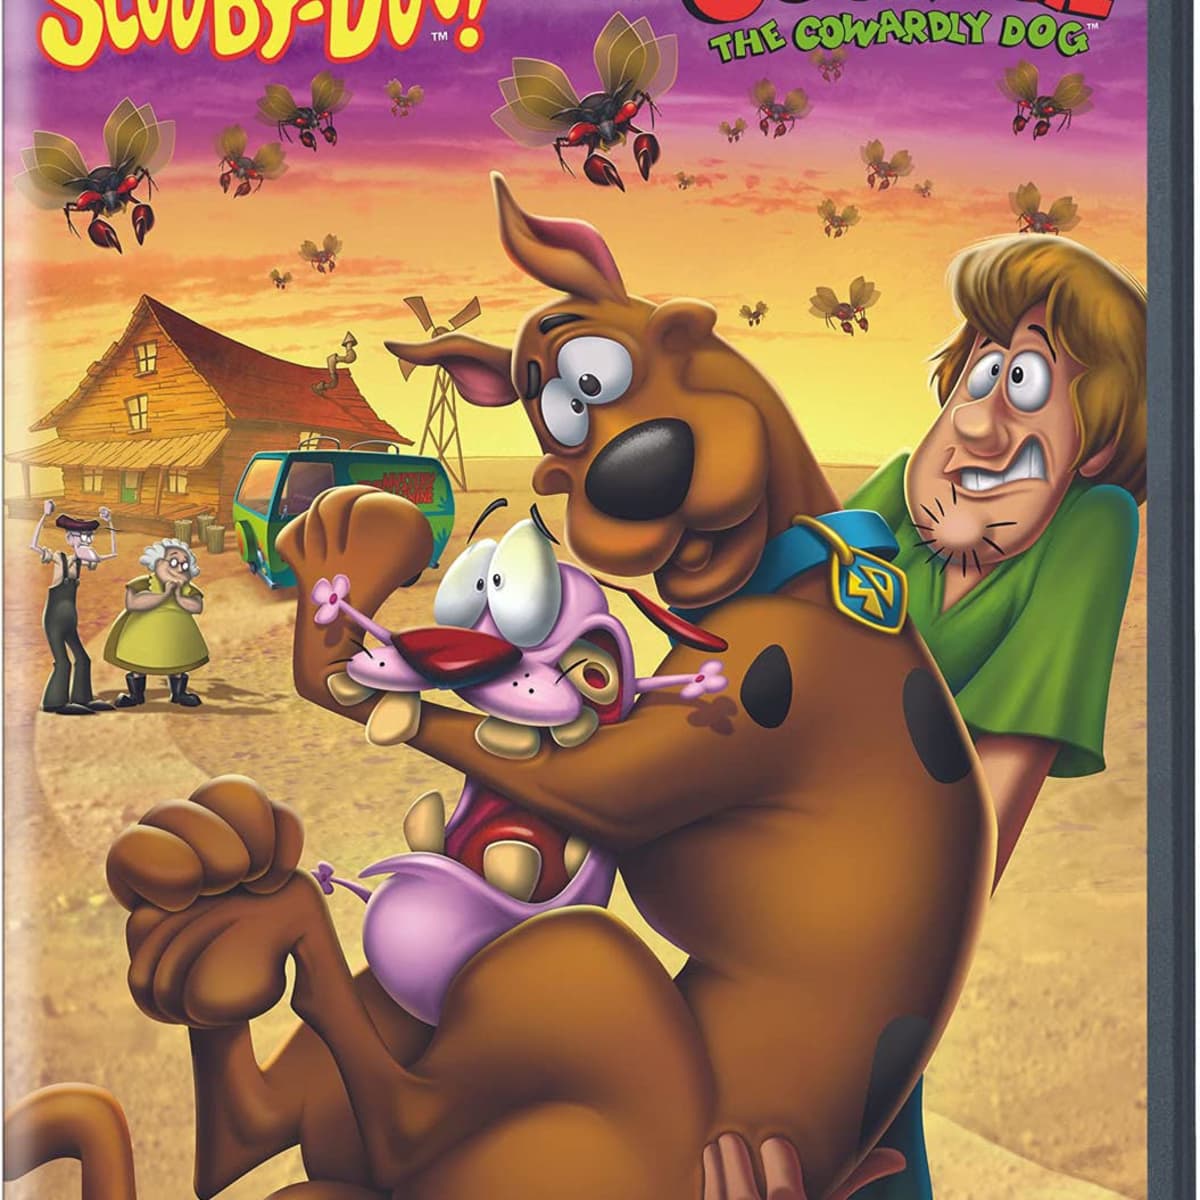 Straight Outta Nowhere Scooby Doo Meets Courage The Cowardly Dog A Nostalgic Supernatural And Fun Crossover Reelrundown